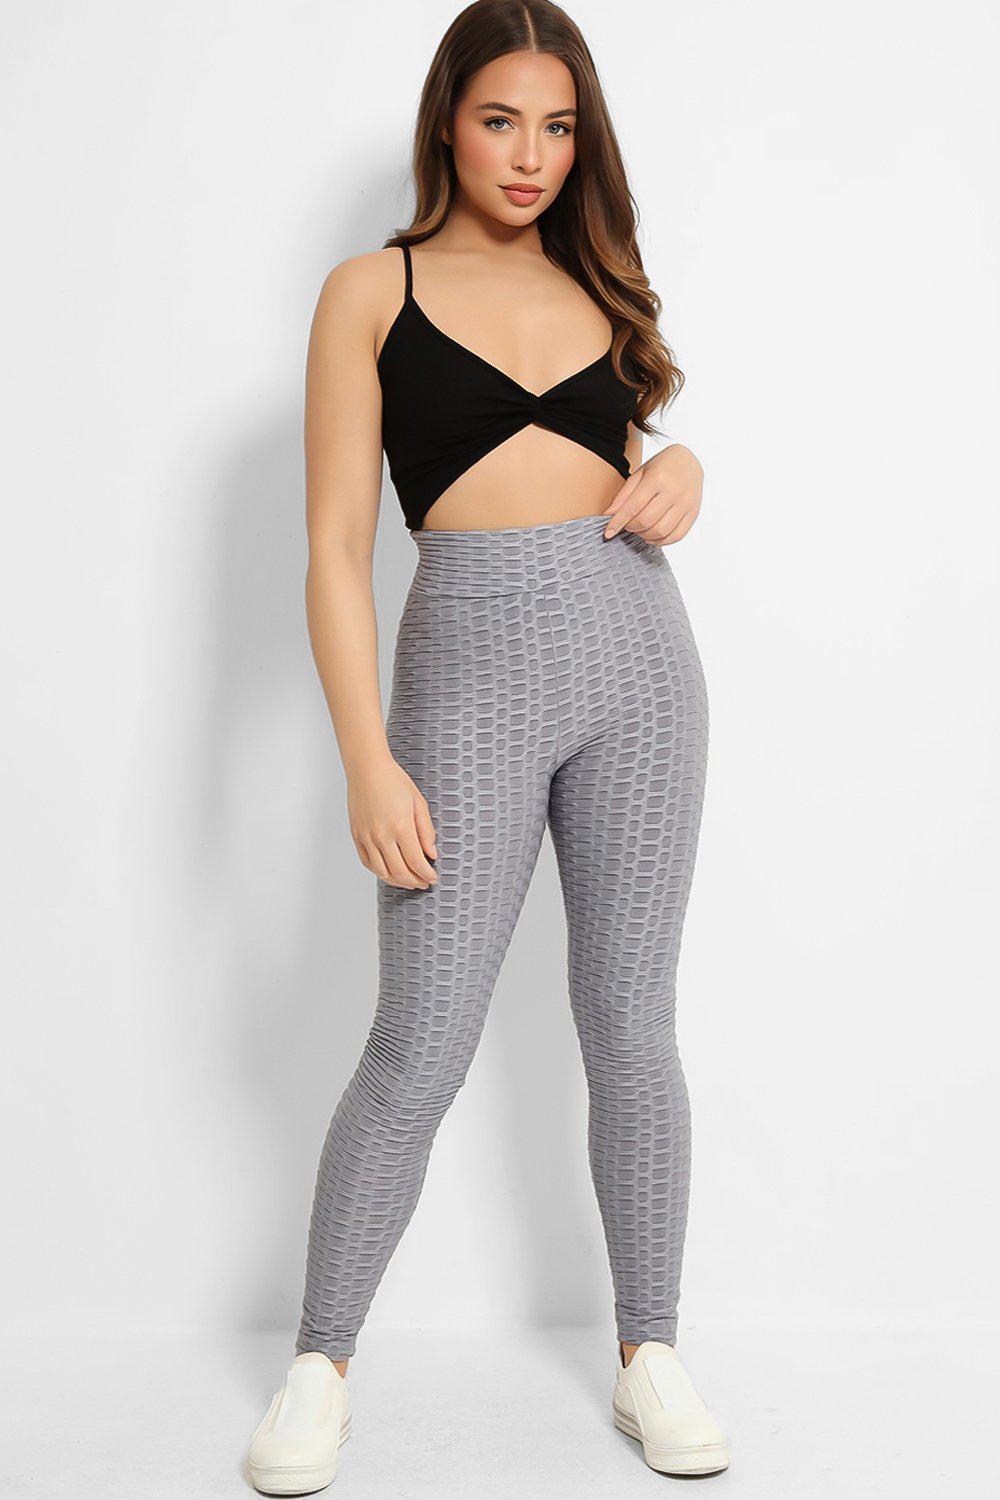 Best Yoga Pants to Hide Cellulite [2023 Review] | Attire Project